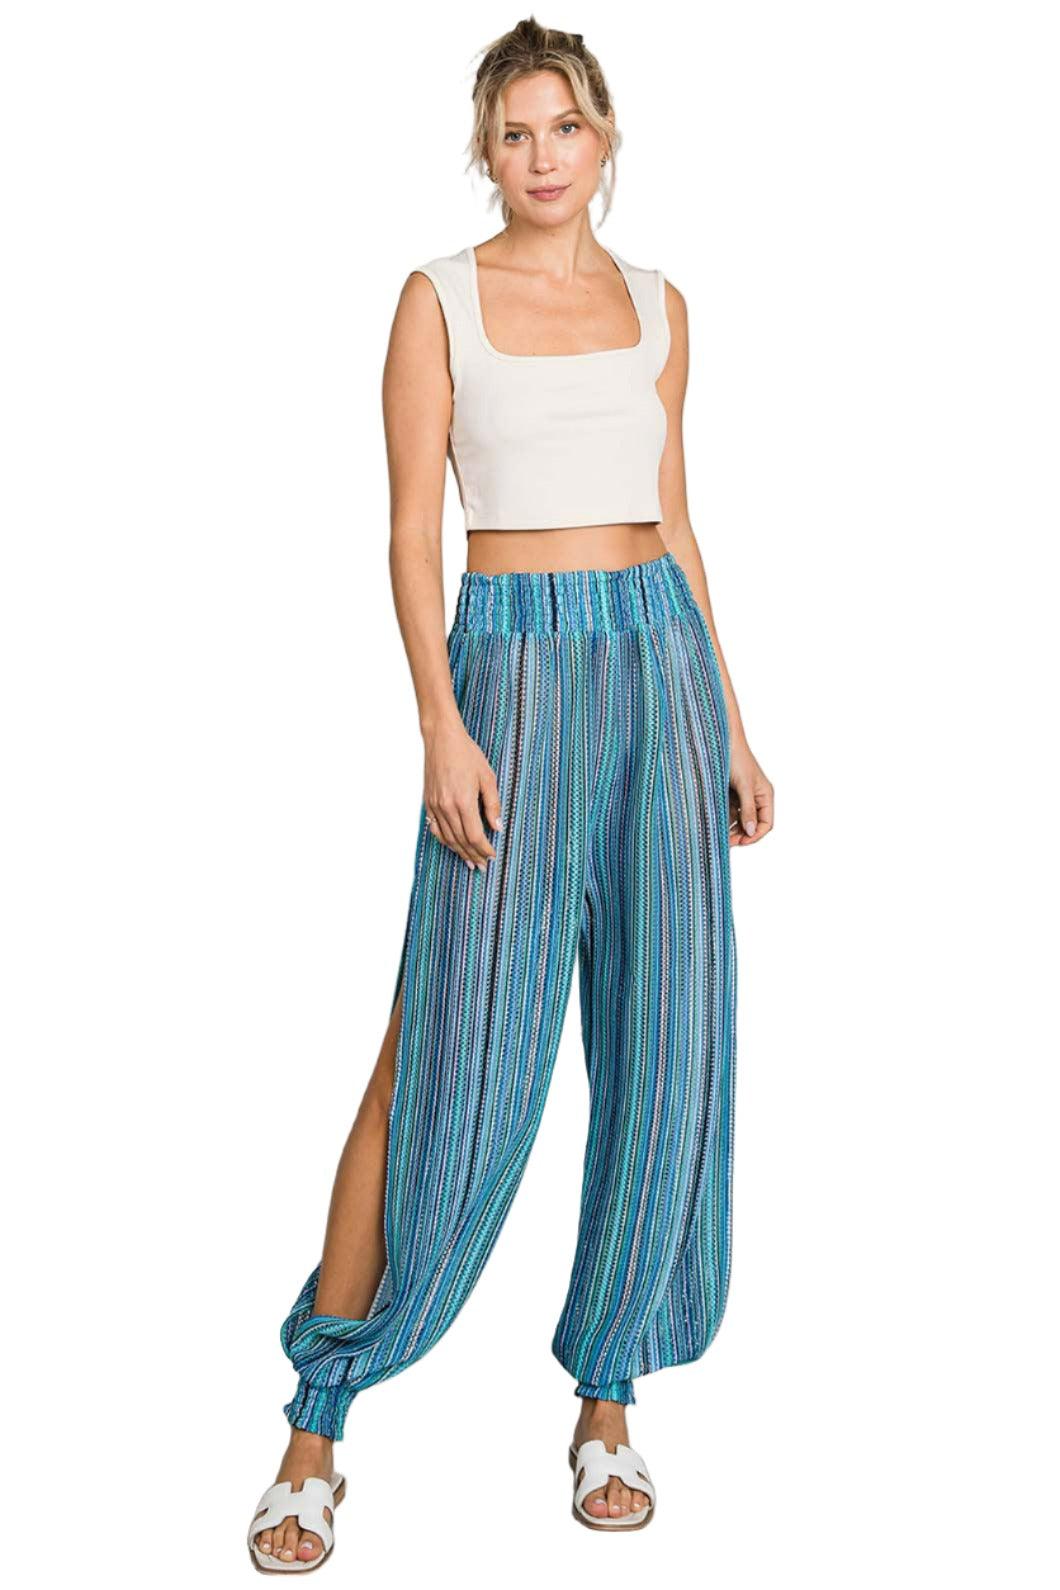 Women's Pants Cotton Bleu by Nu Label Striped Smocked Cover Up Pants